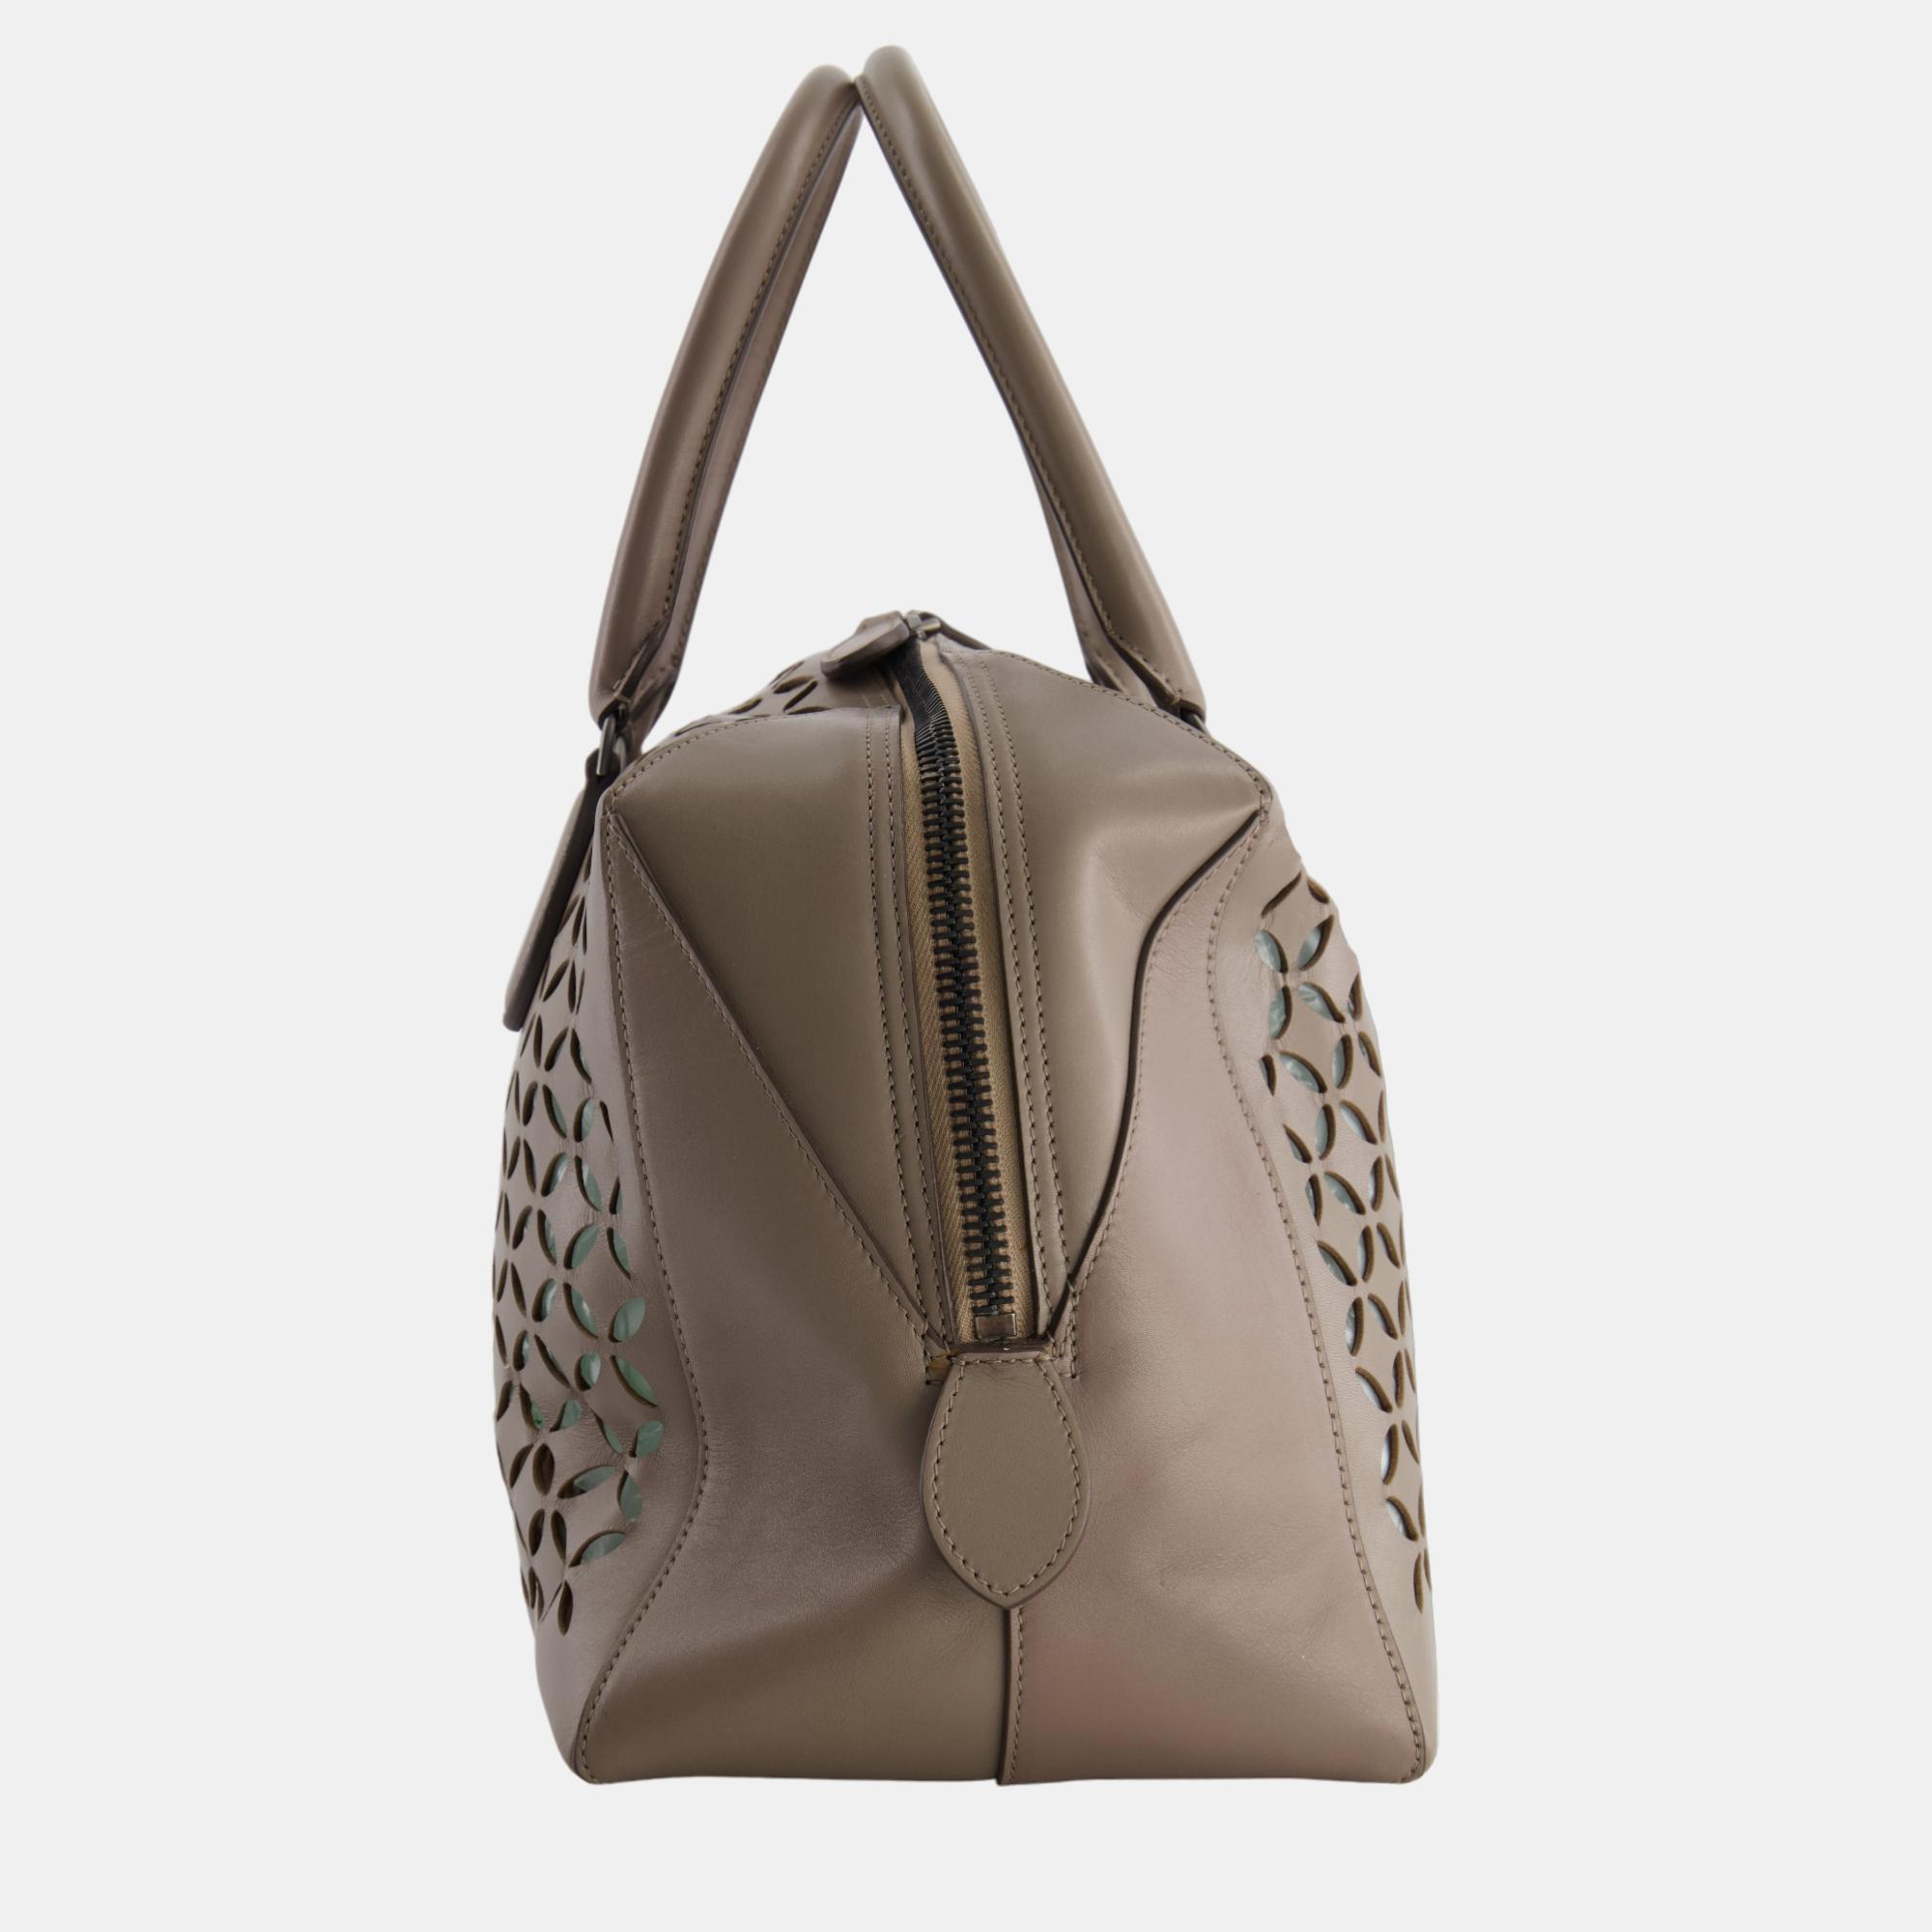 Alaia Taupe Brown Laser Cut Leather Small Tote Bag